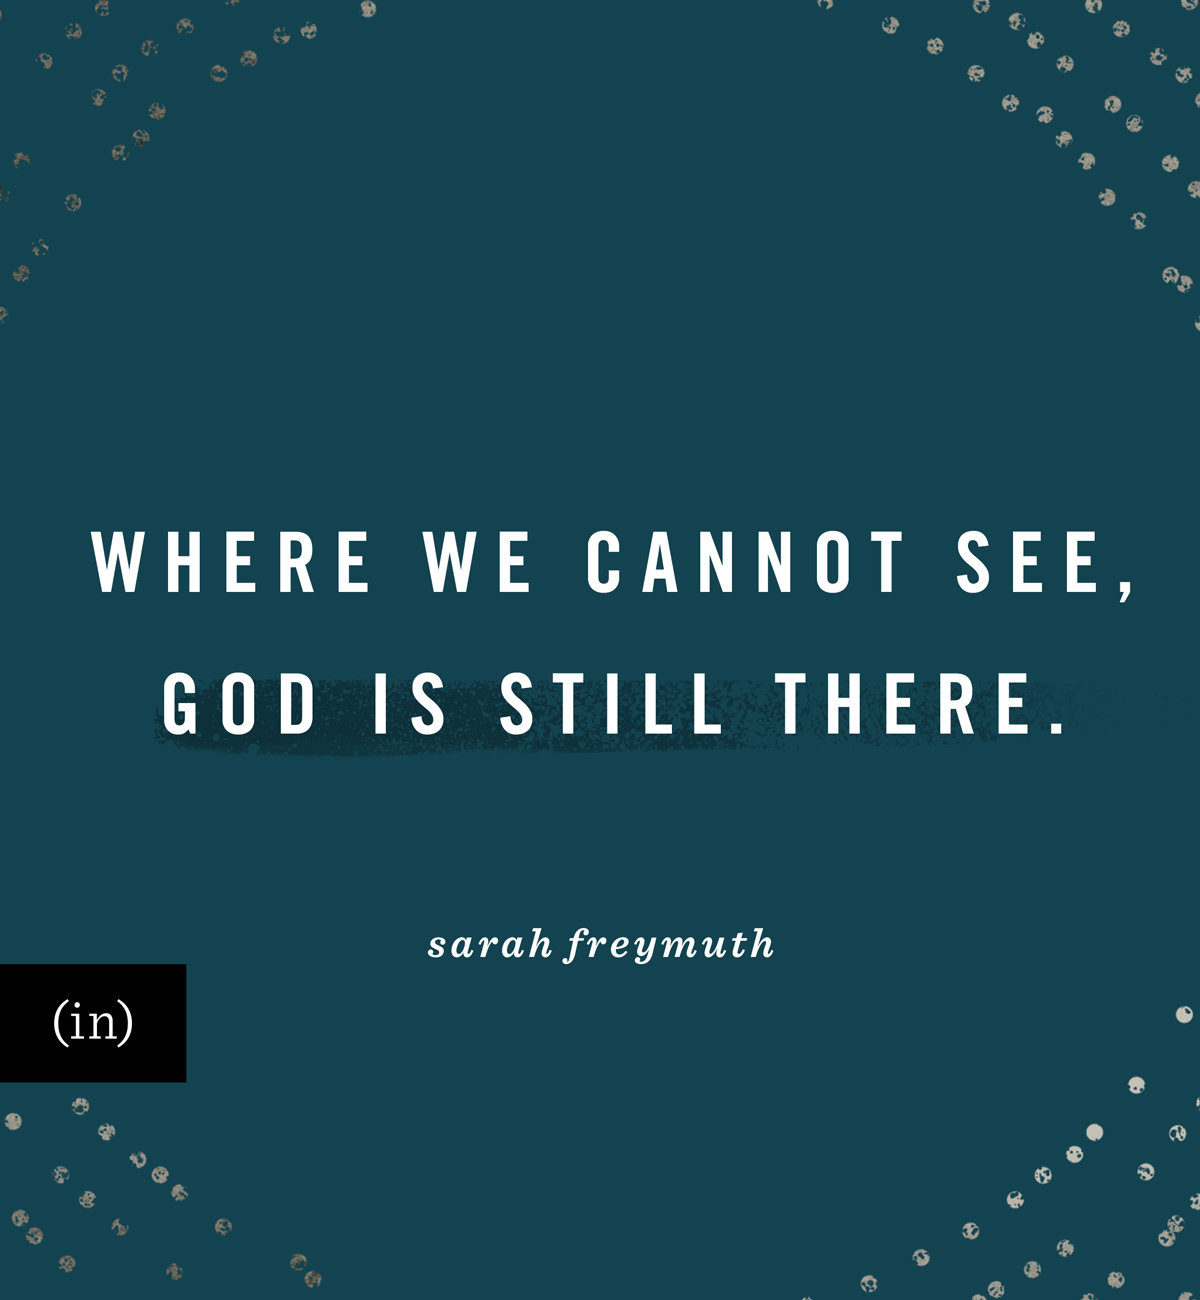 Where we cannot see, God is still there. -Sarah Freymuth